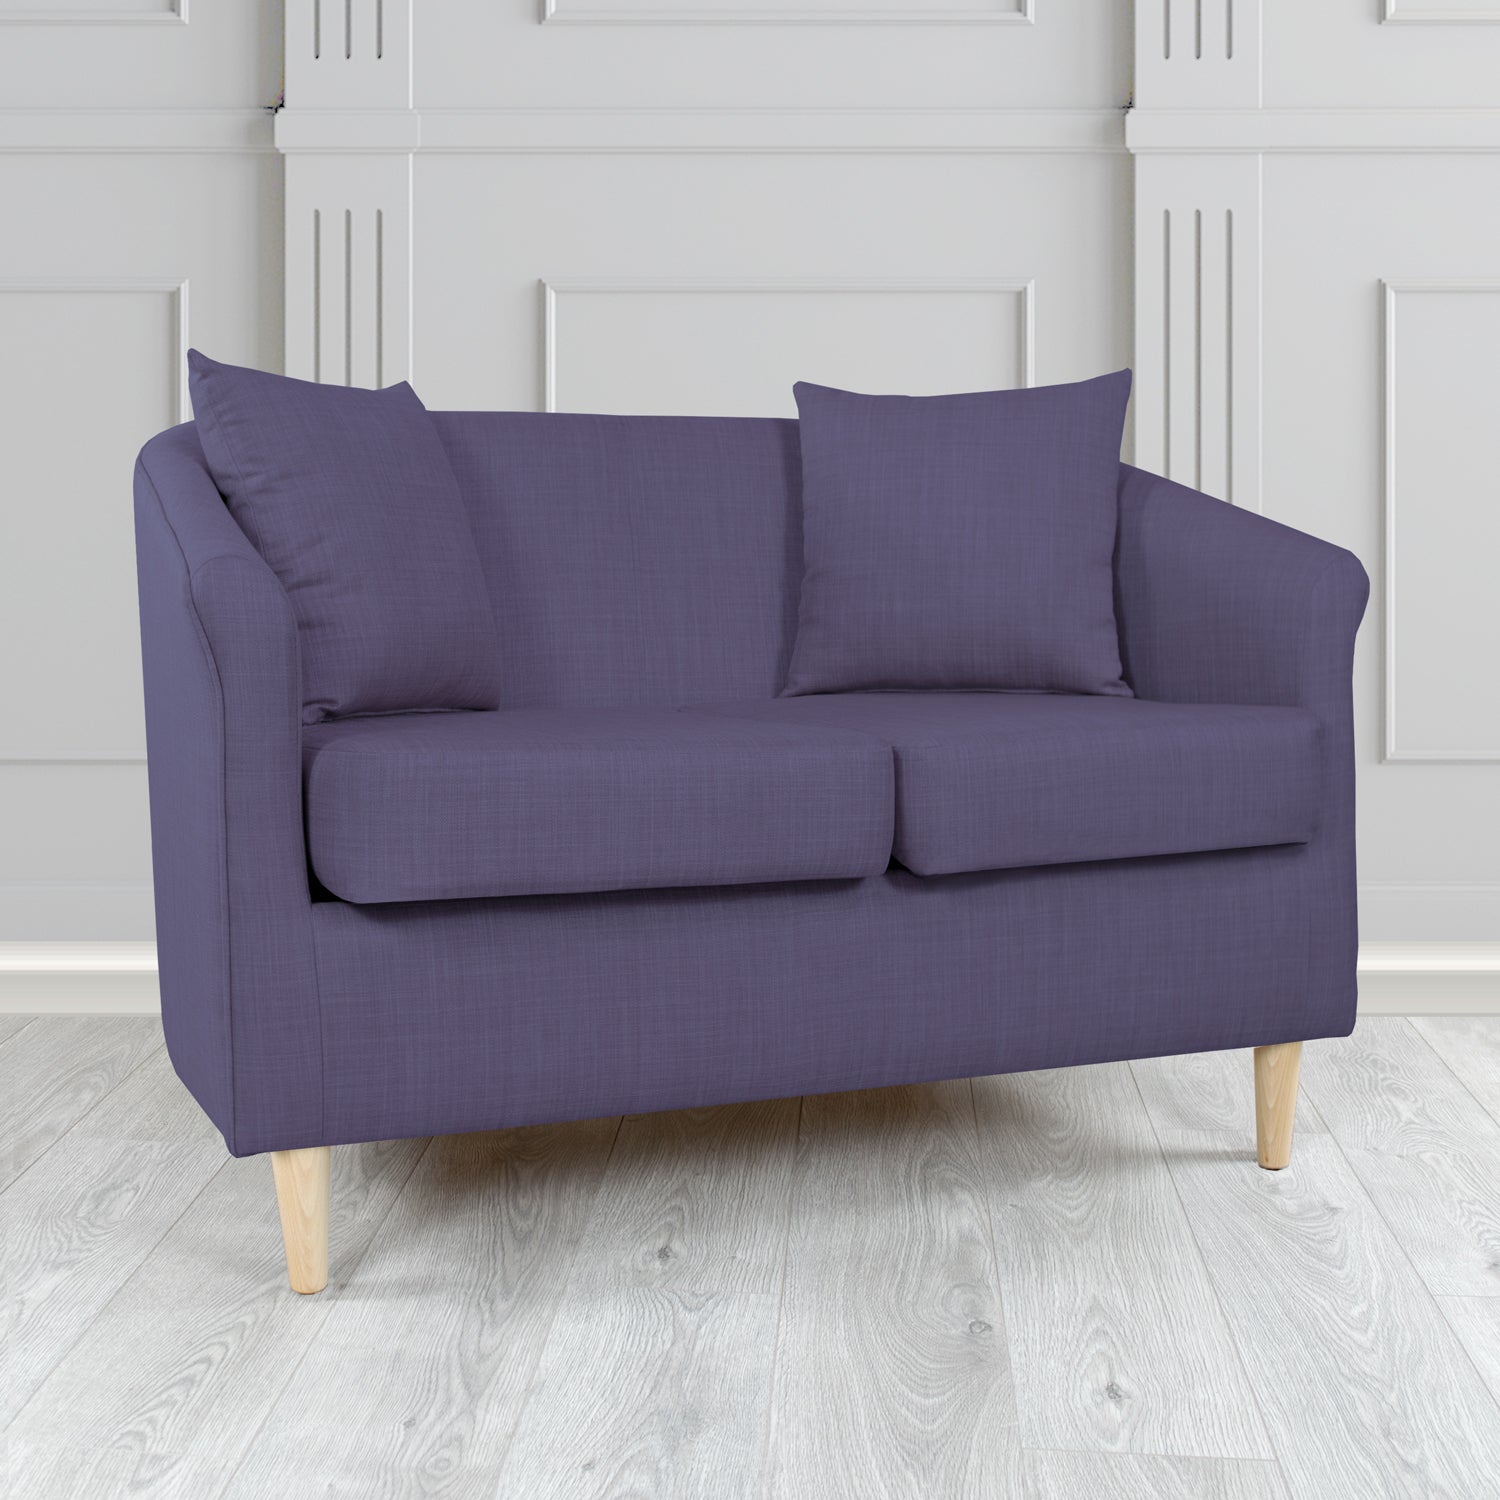 St Tropez Charles Purple Plain Linen Fabric 2 Seater Tub Sofa with Scatter Cushions - The Tub Chair Shop